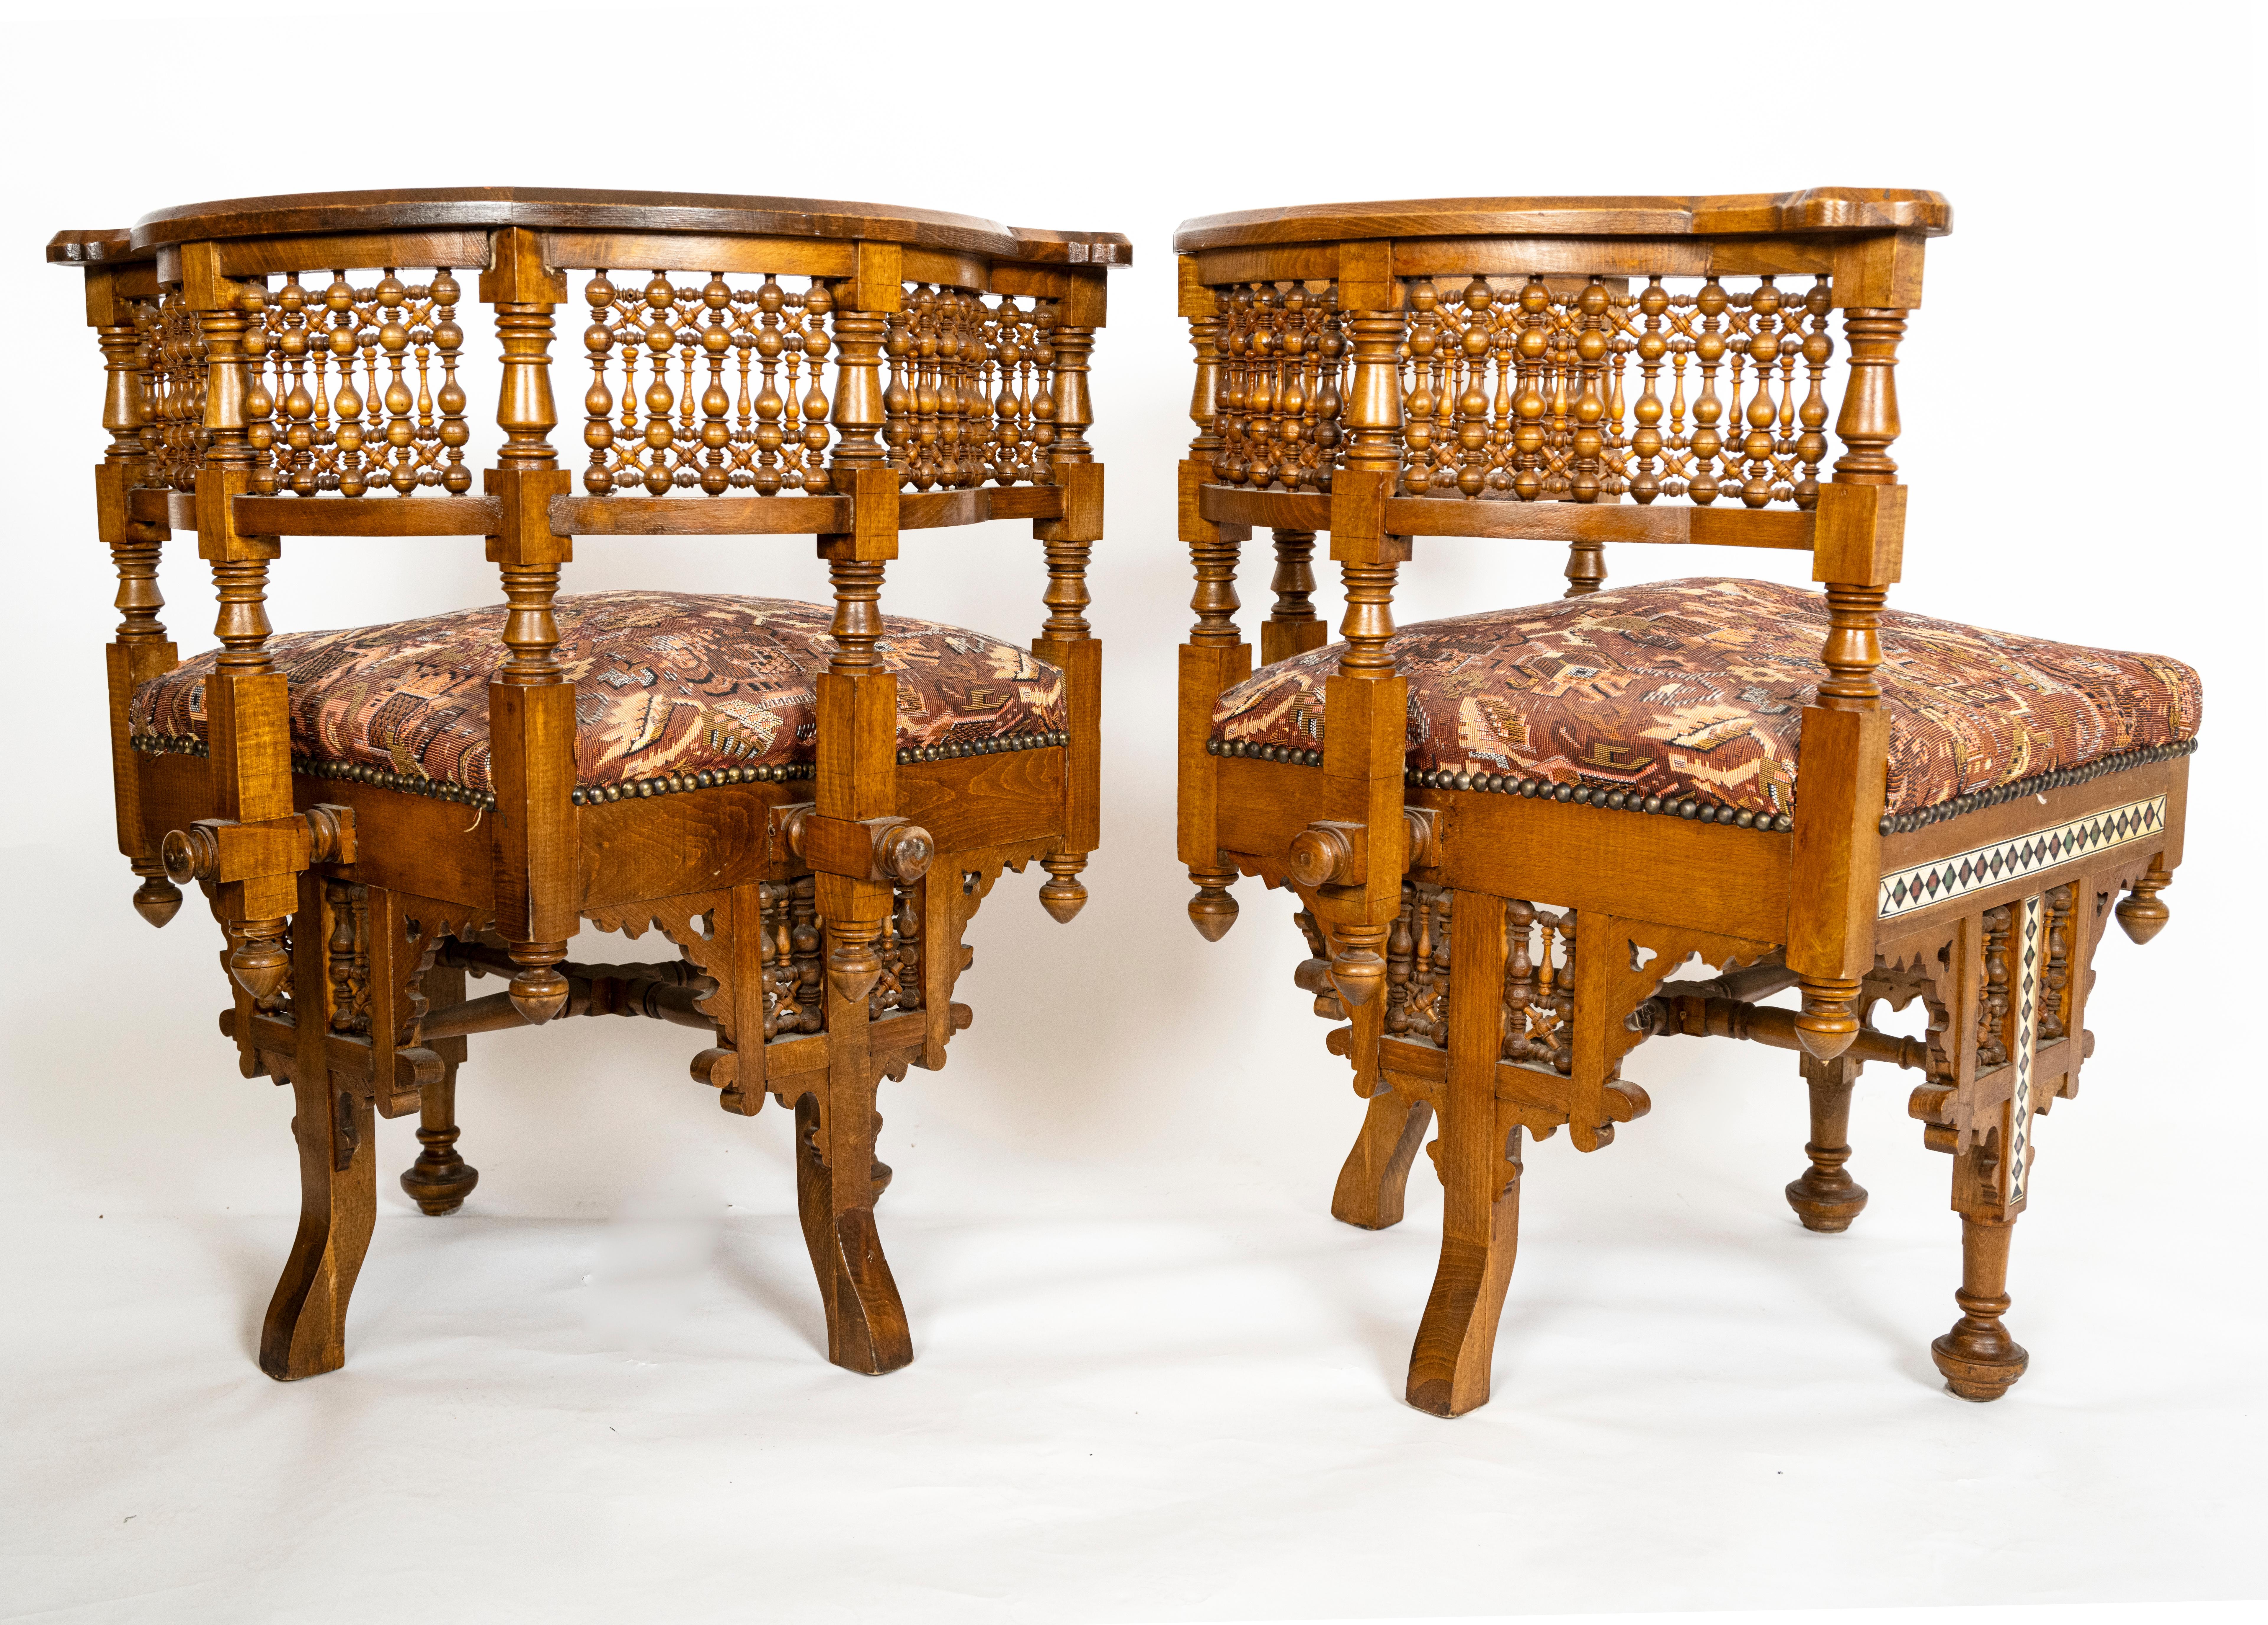 Fretwork A Pair of Moorish-Style American Open Arm Chairs For Sale